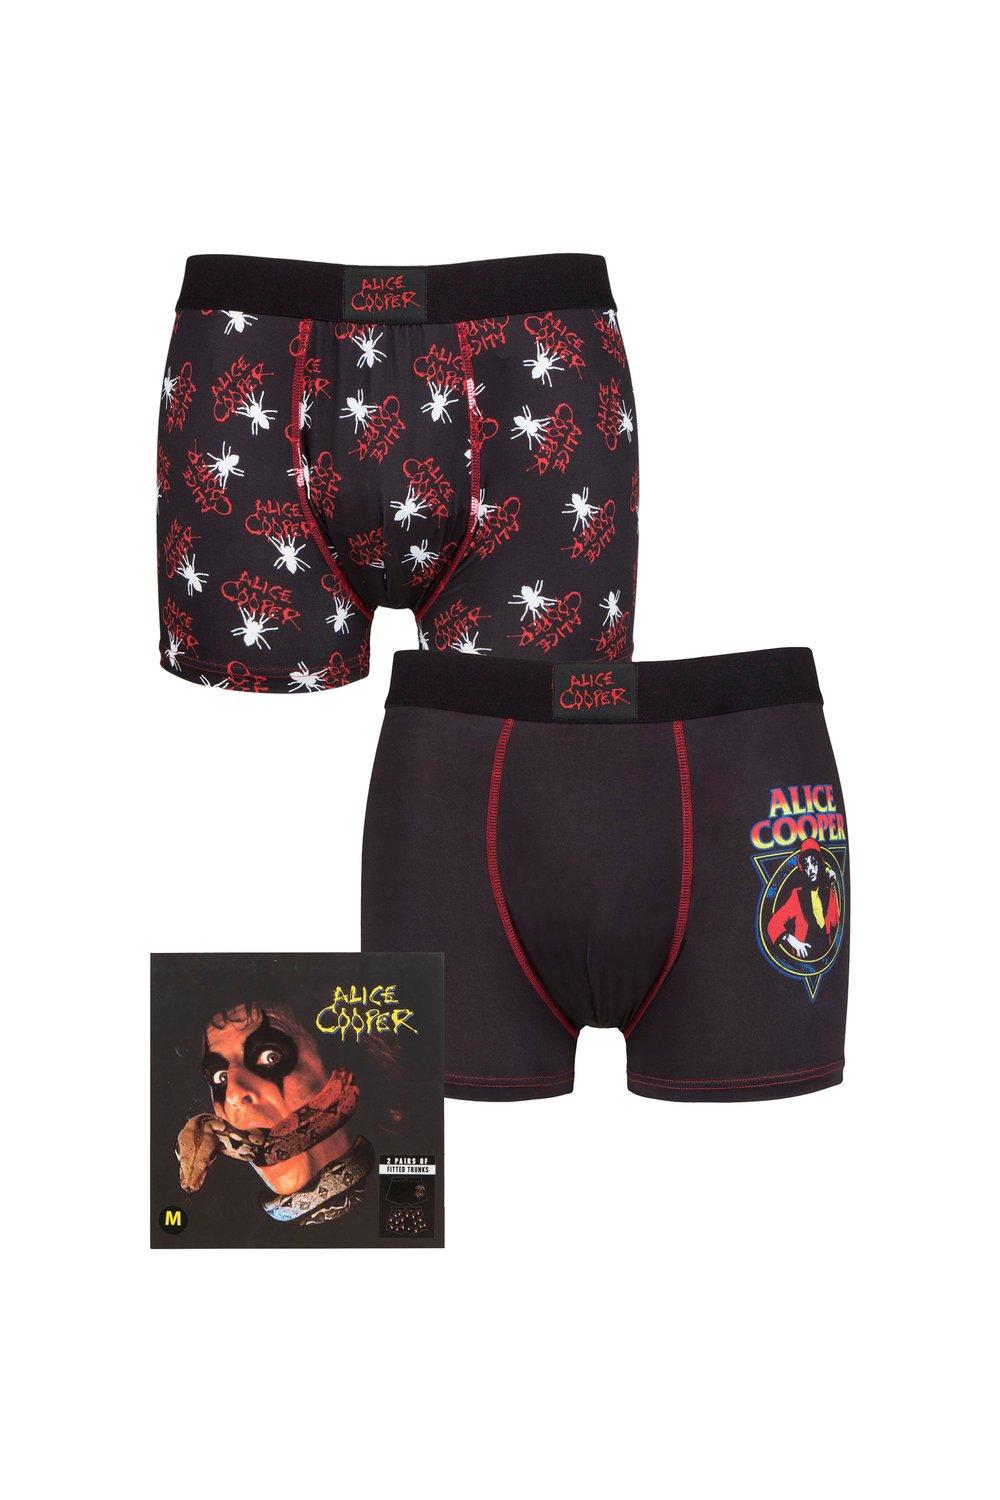 Alice Cooper 2 Pack Exclusive to Gift Boxed Boxer Shorts